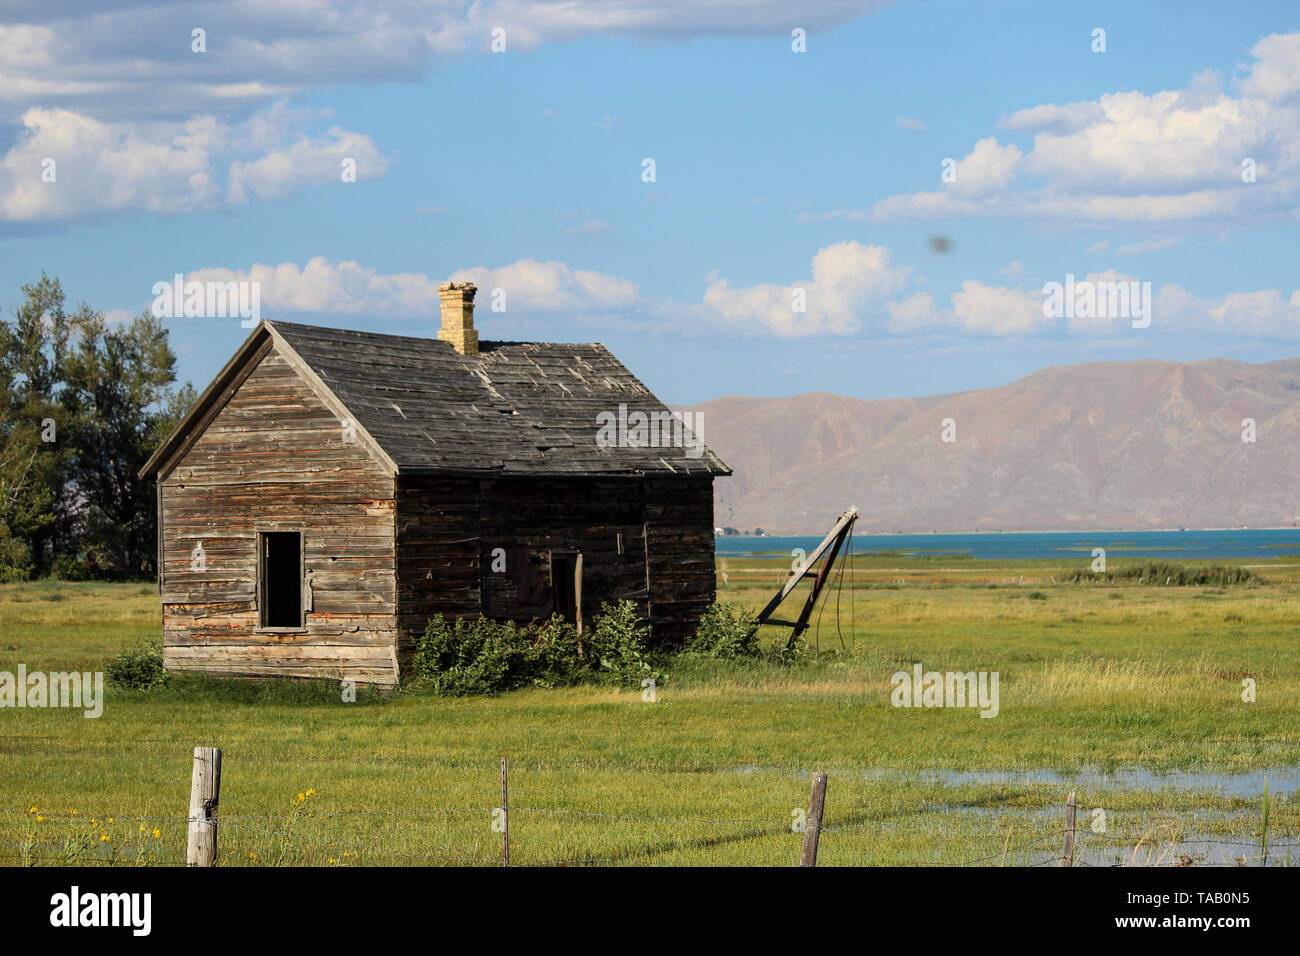 Rustic brown cabin in rural farm landscape near lake with mountains in distance, under a blue sky with clouds. Stock Photo